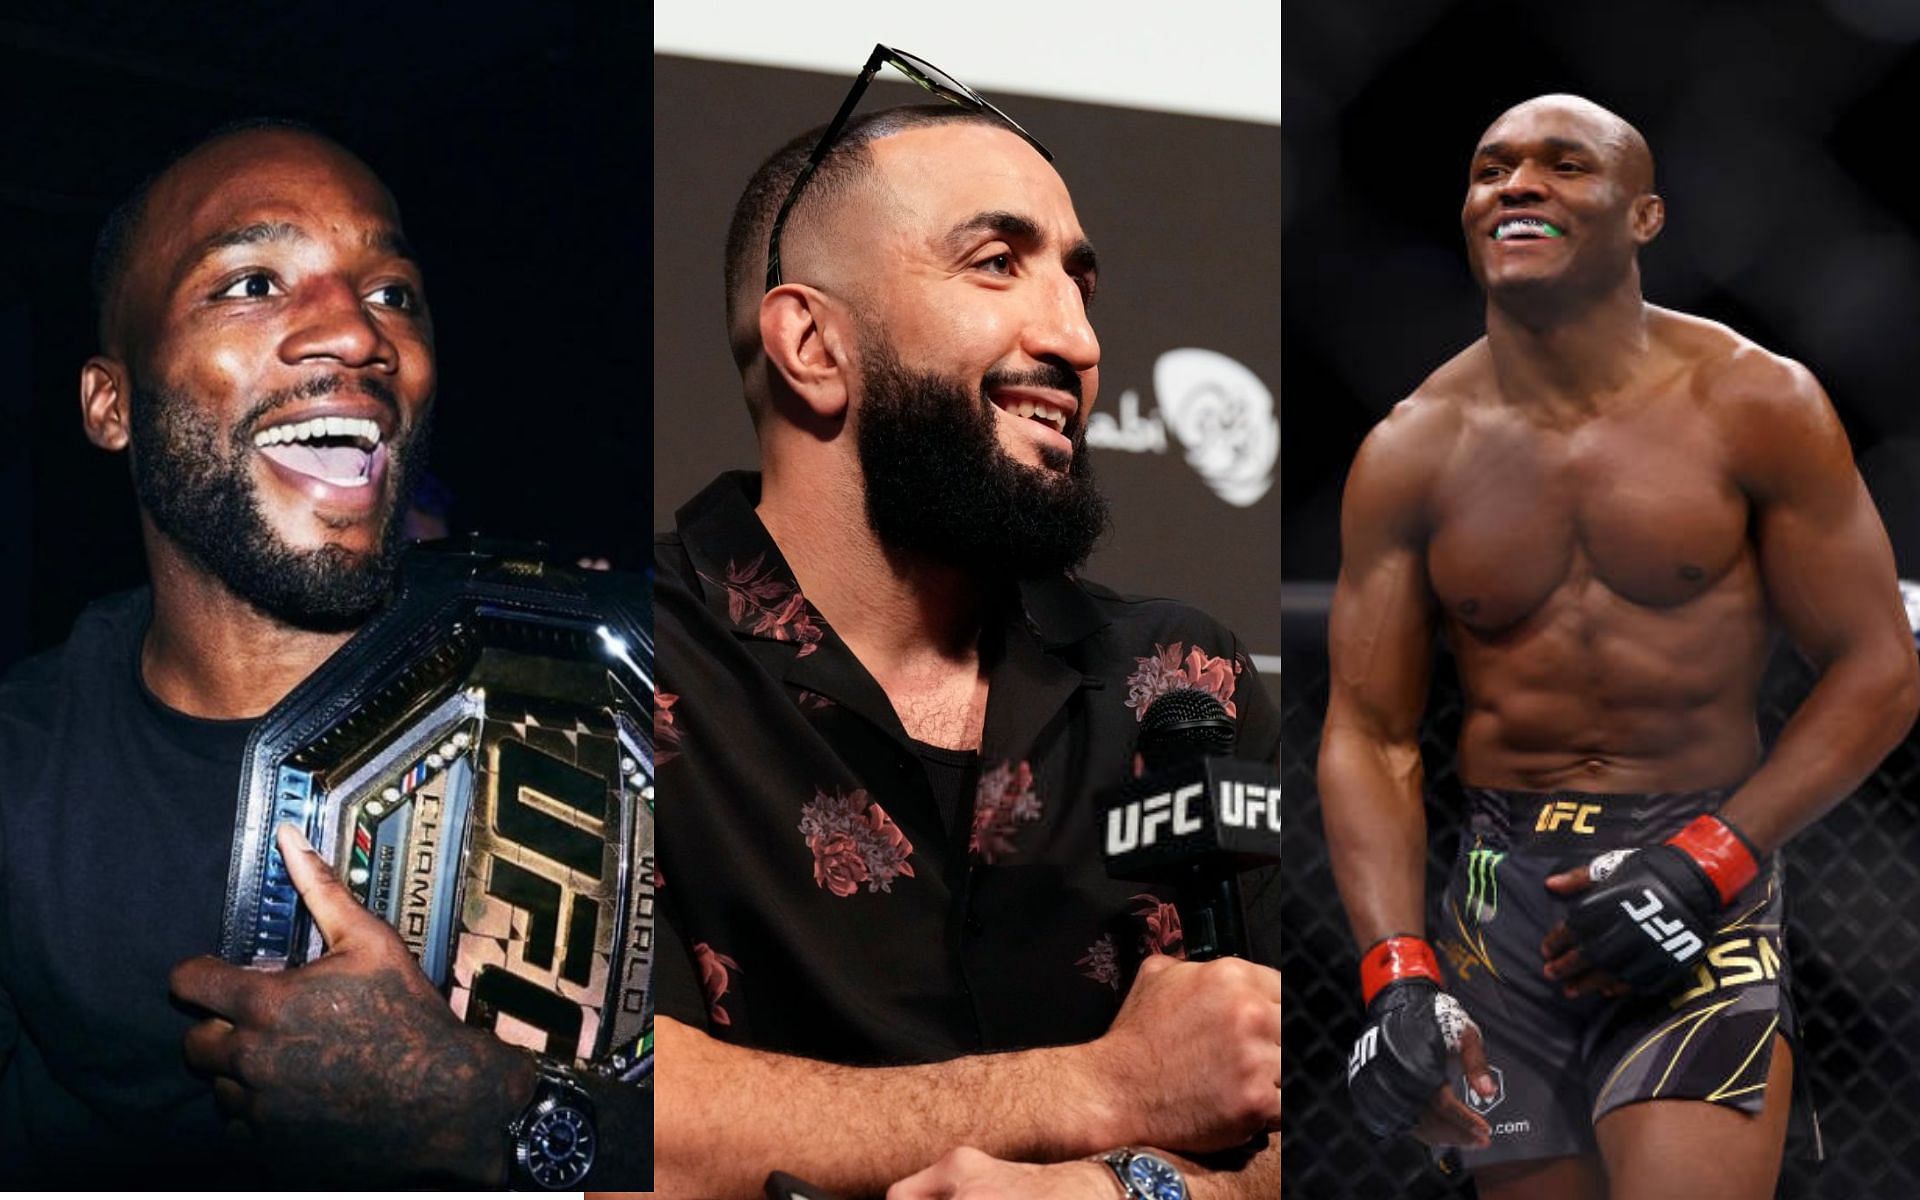 Belal Muhammad will give Kamaru Usman a title shot after beating Leon Edwards for the title